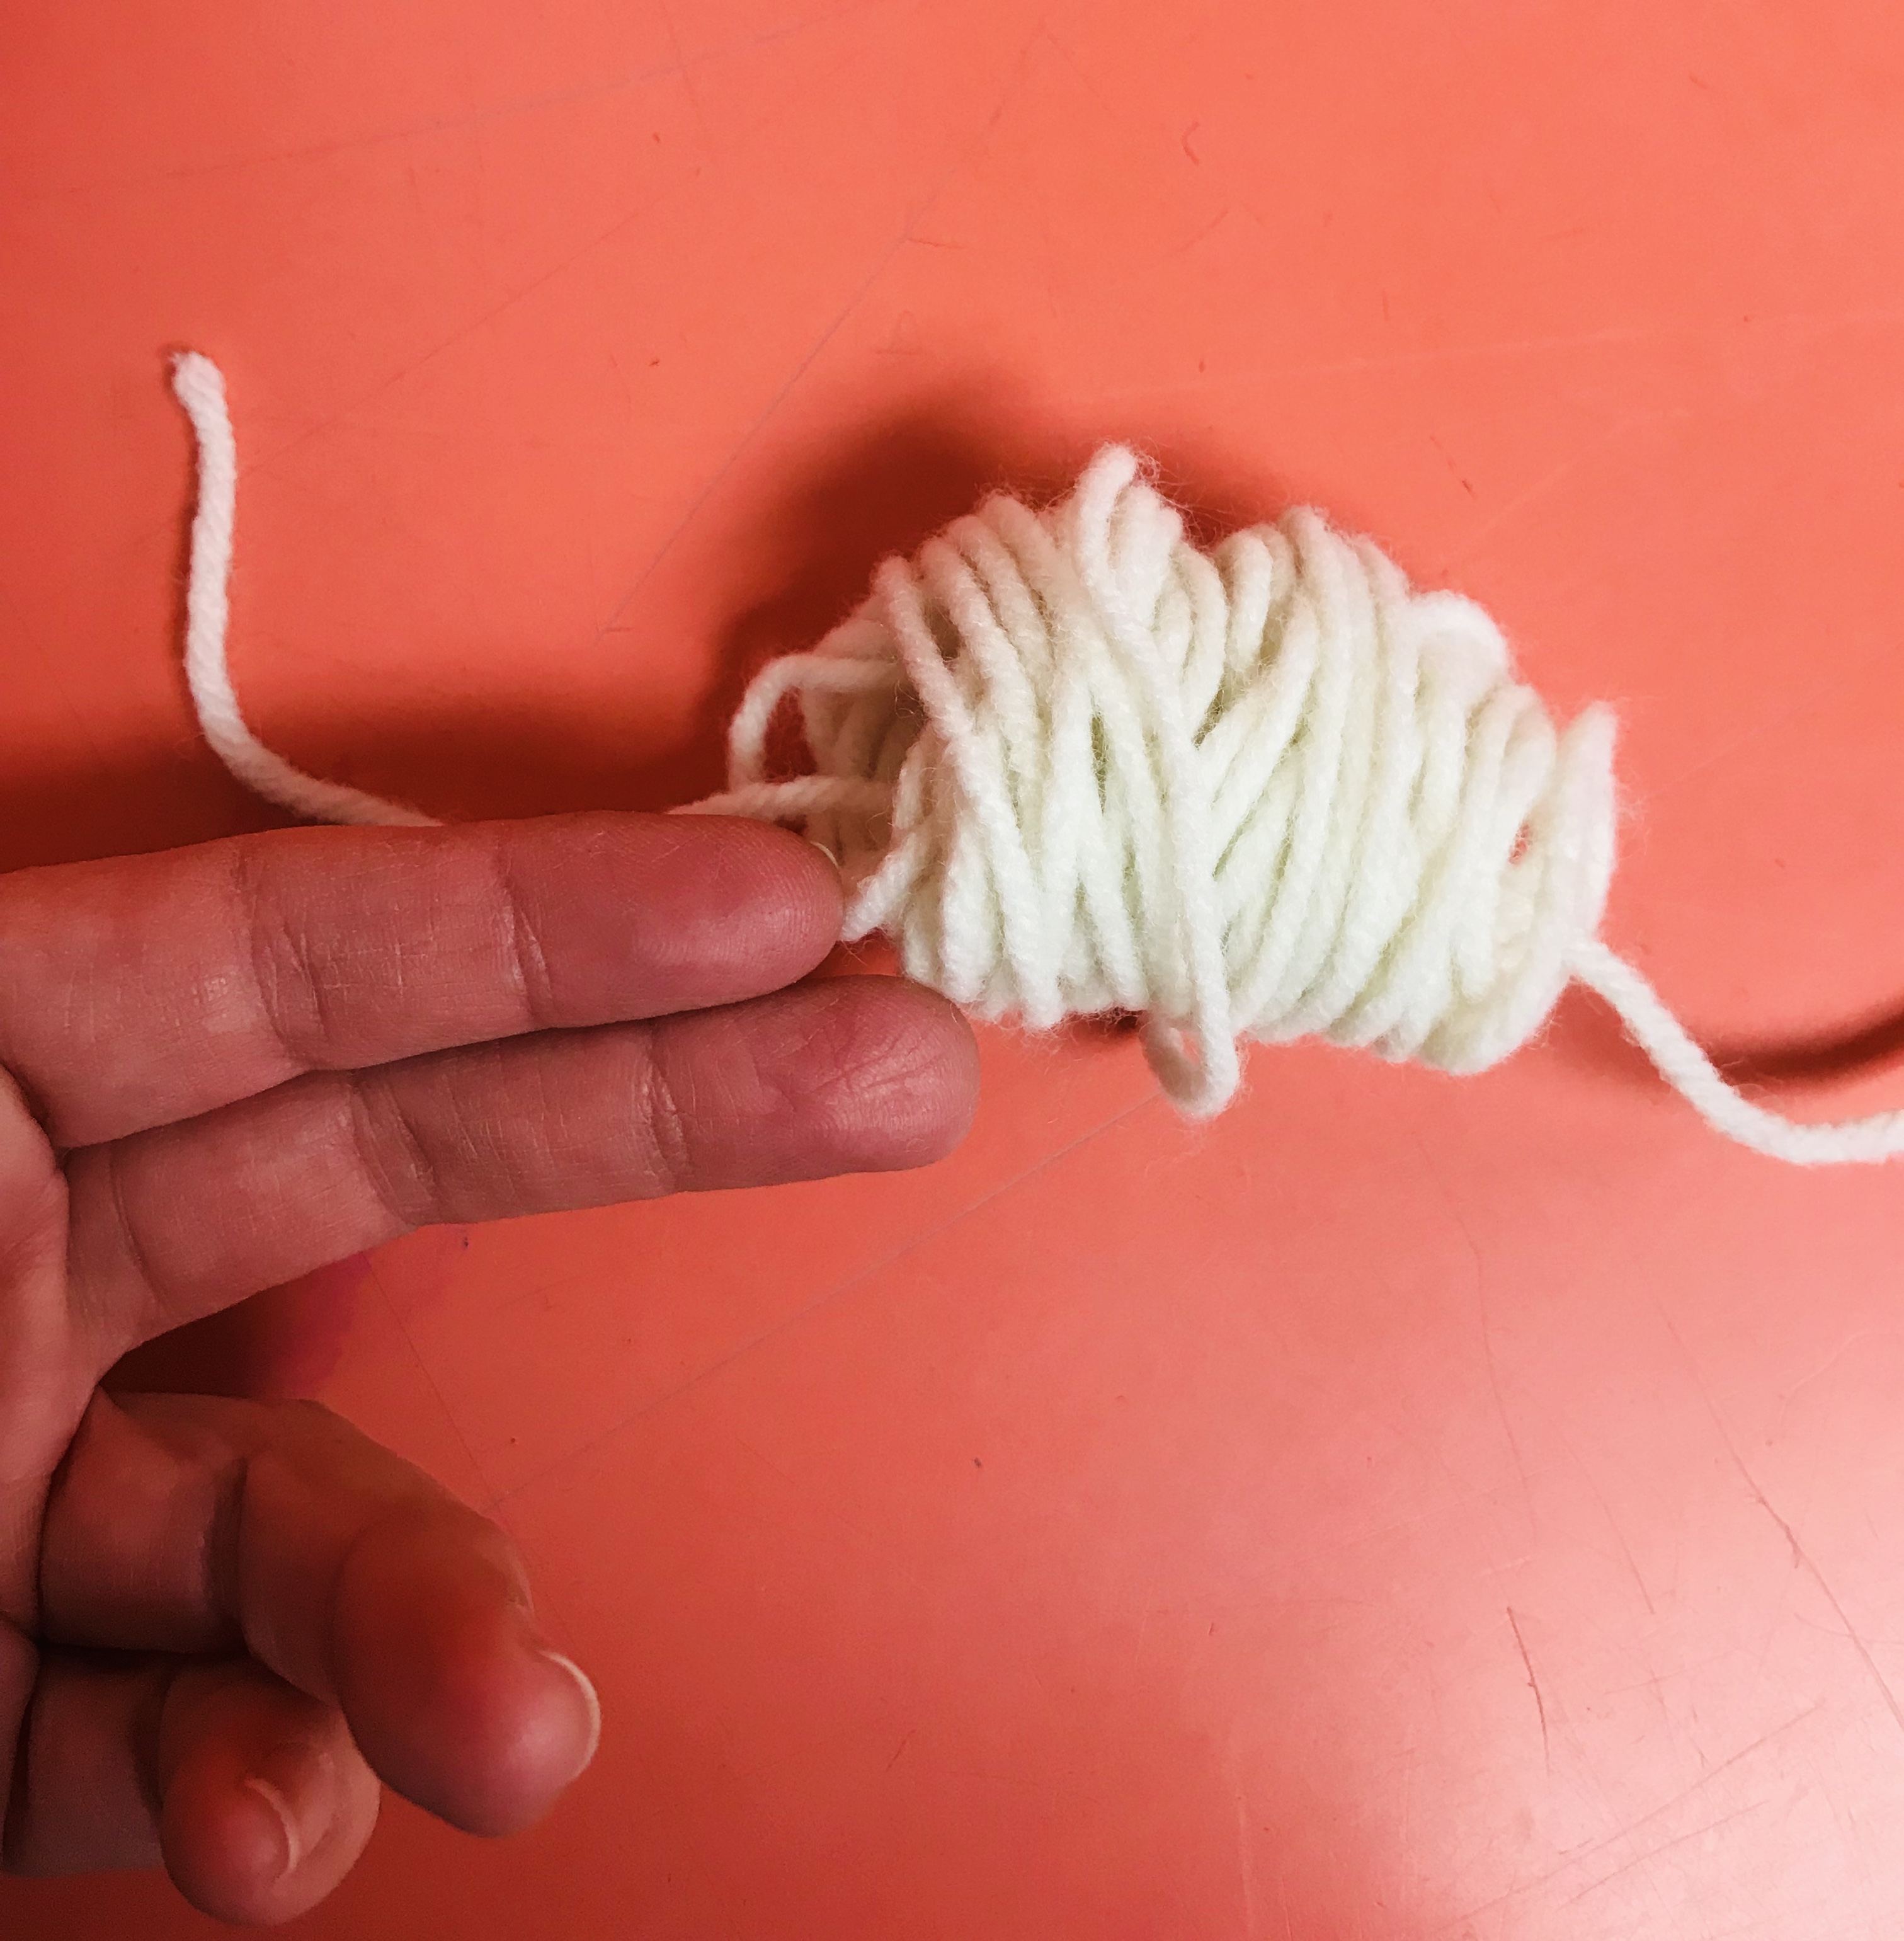 Removed yarn wrapping